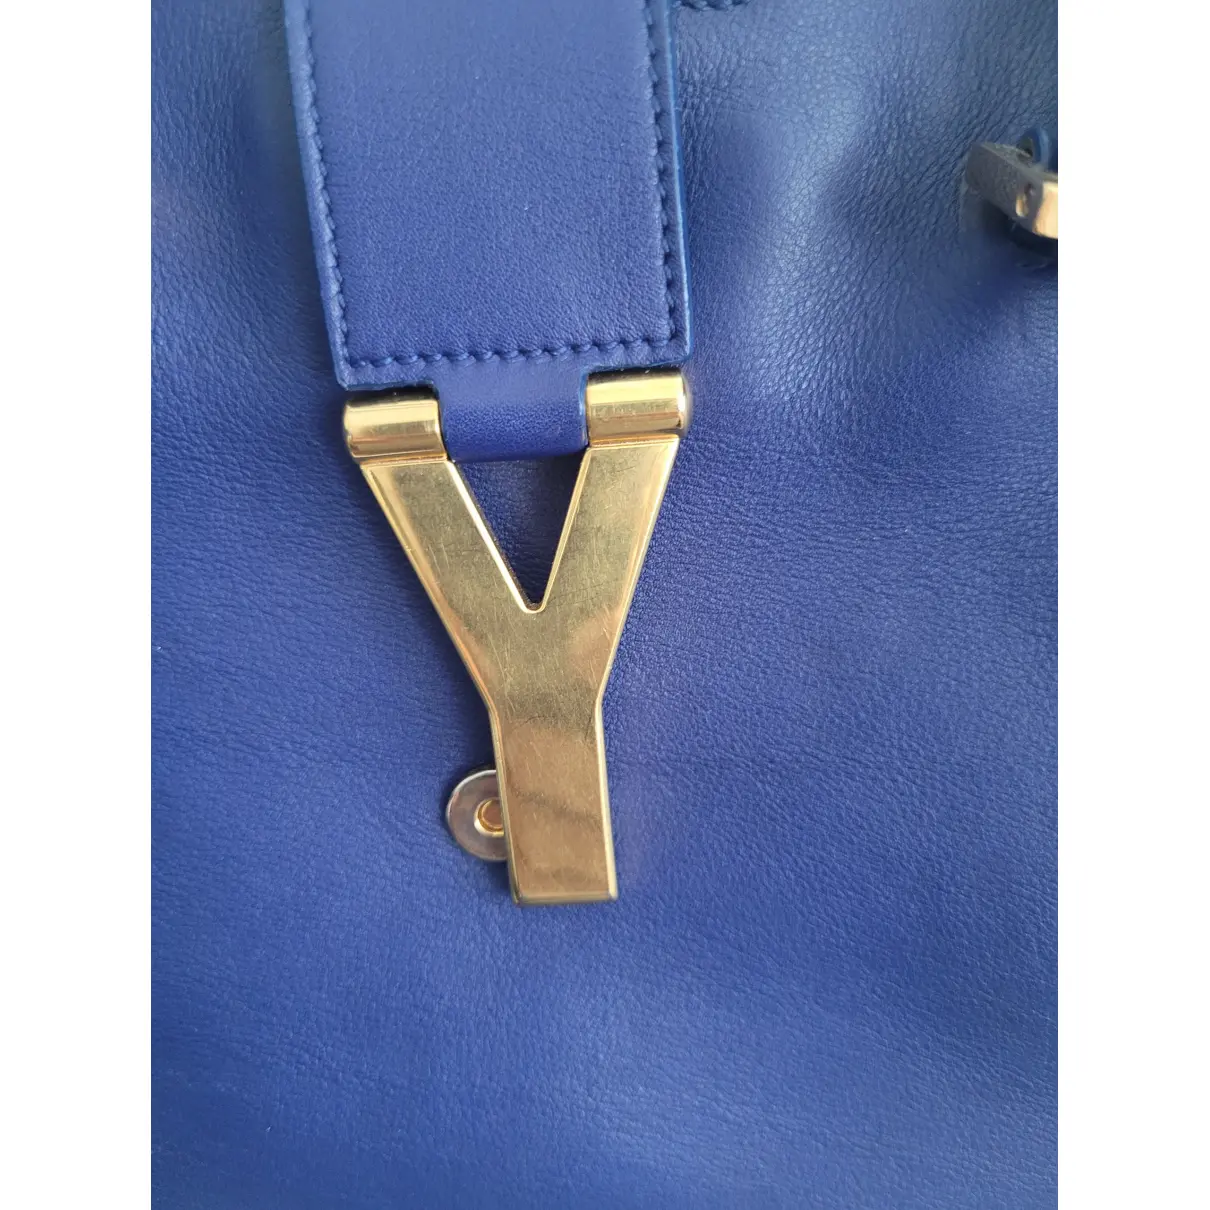 Buy Saint Laurent Chyc leather tote online